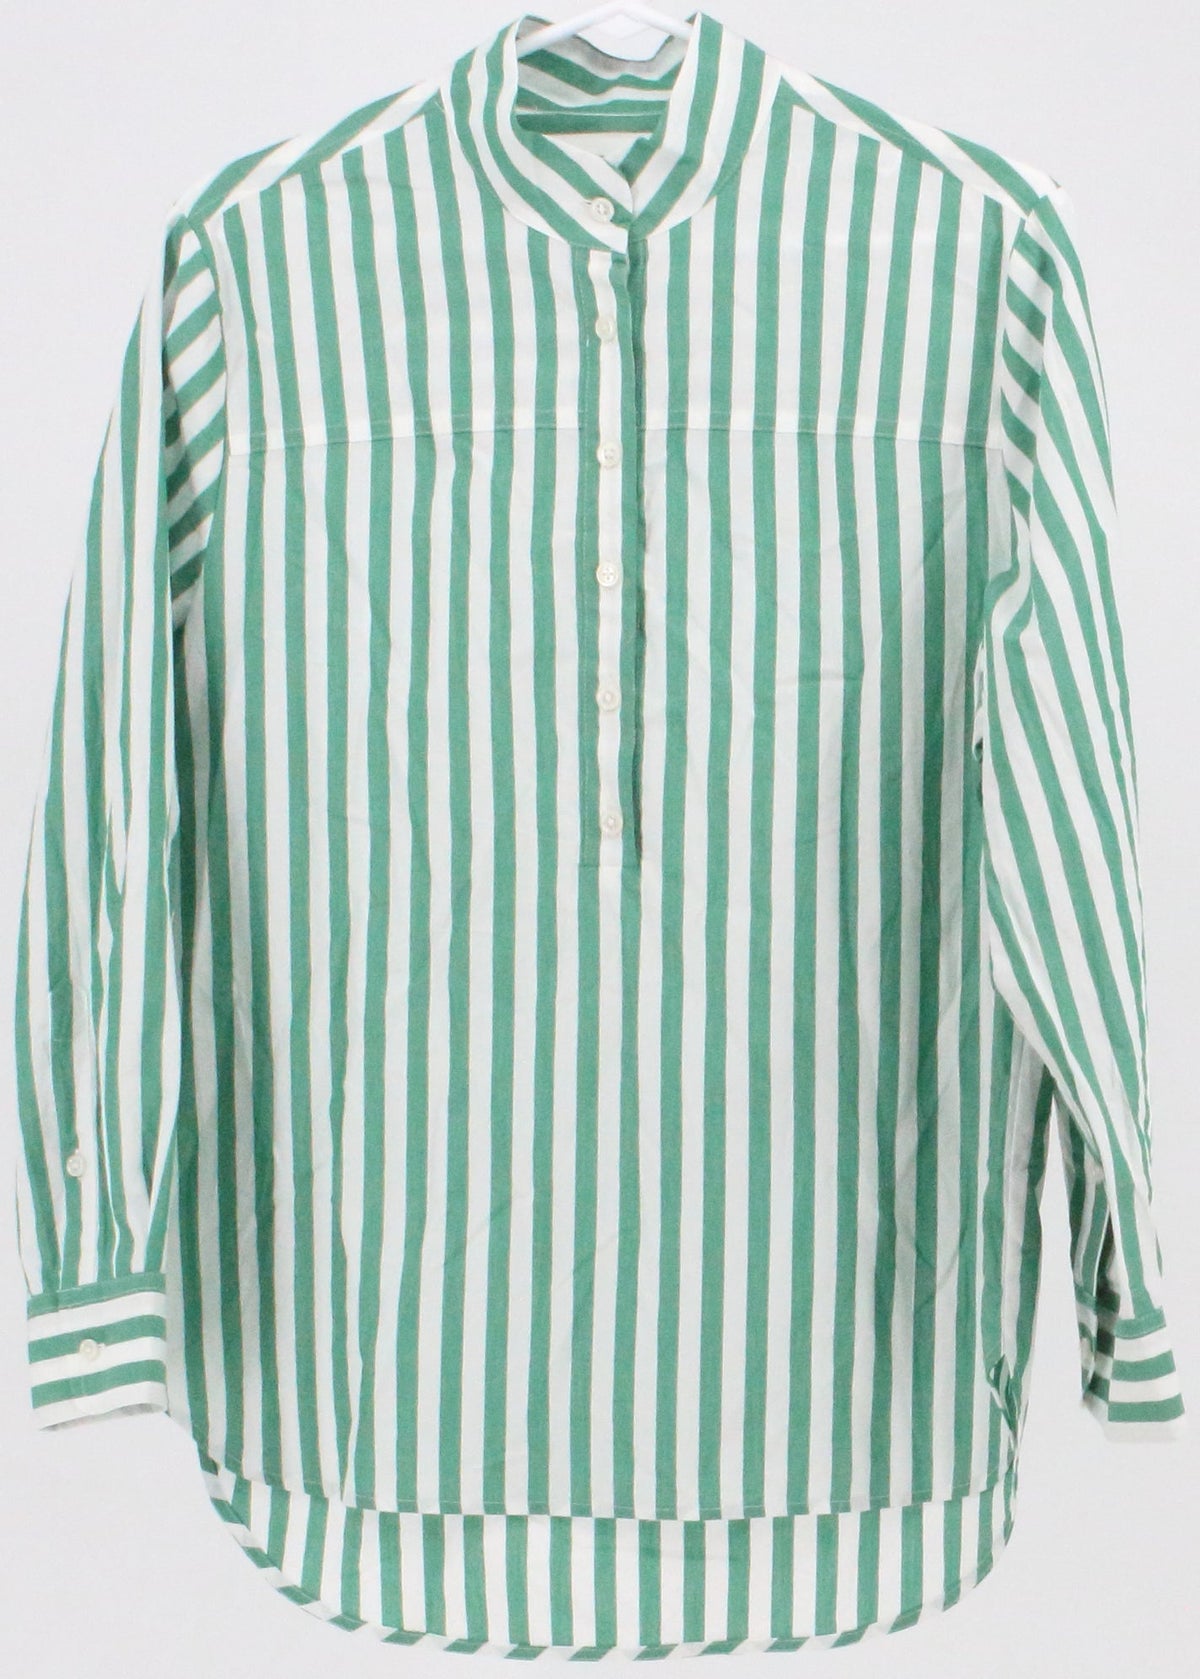 J Crew Green and White Striped Blouse